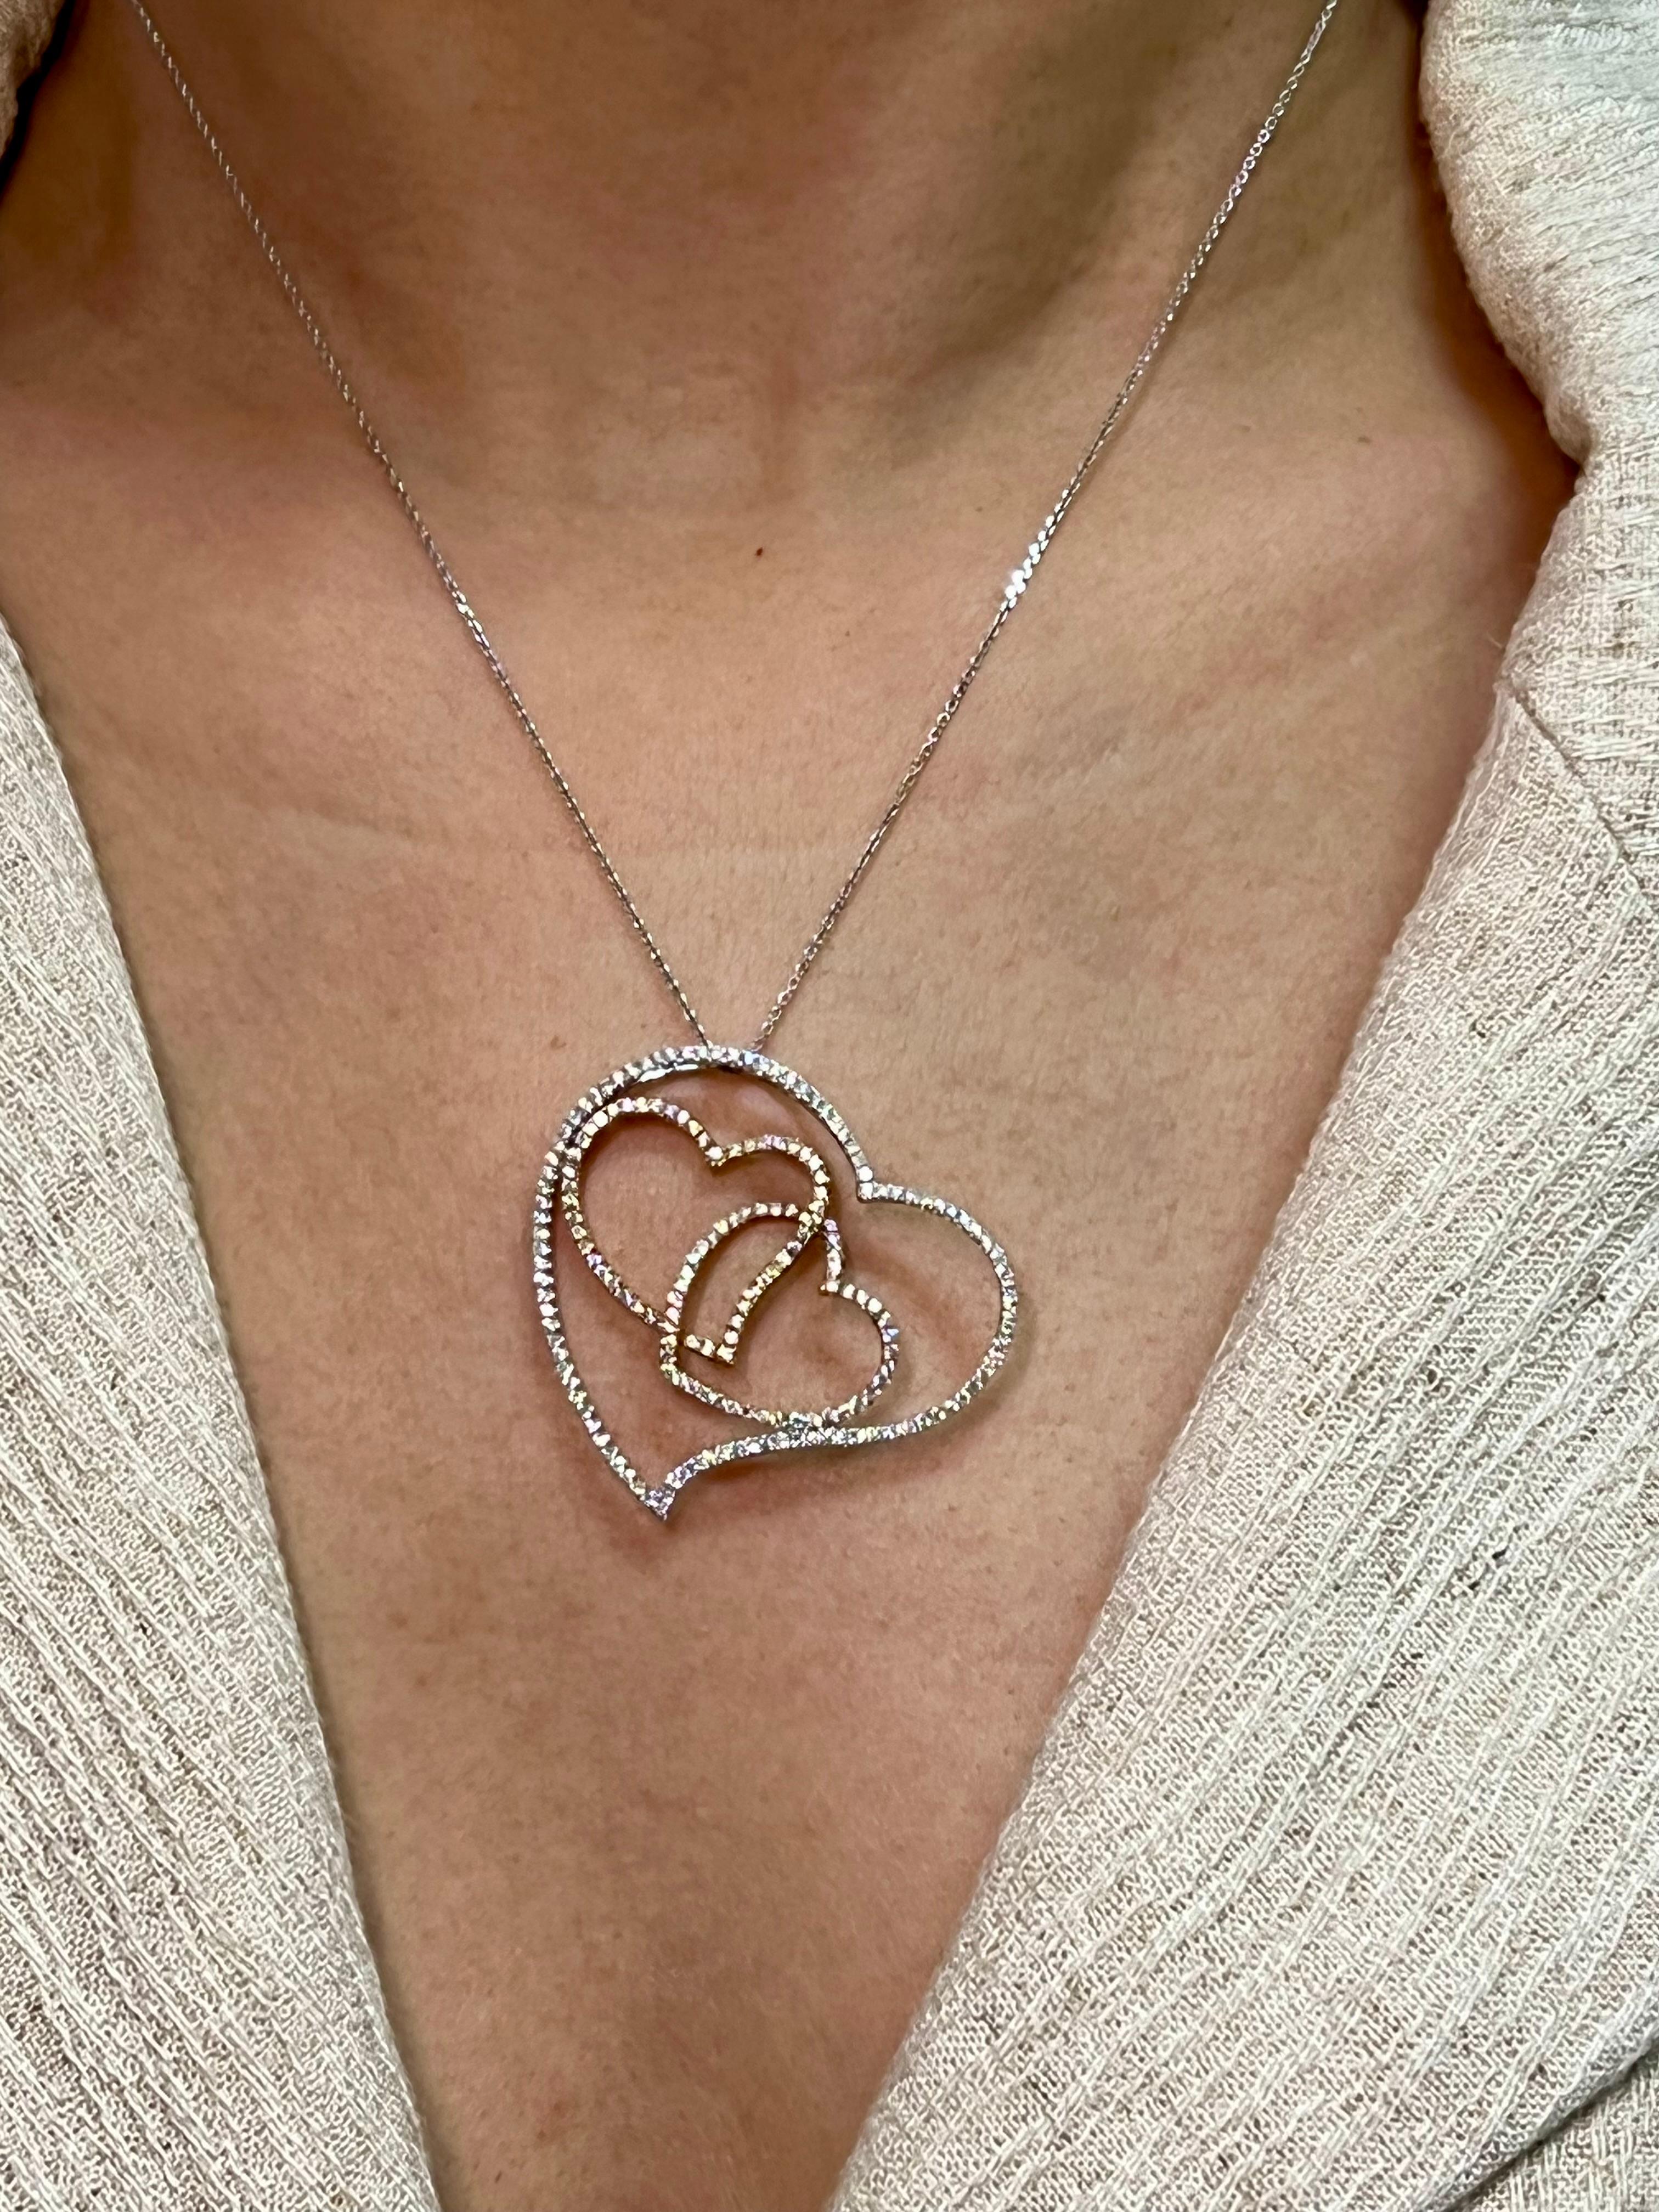 Please check out the HD video. This pendant has a 3D look with an excellent depth of field. It looks like 3 hearts floating. There are 190 diamonds totaling 1.08cts used in this rose and white gold setting. An 18k white gold chain will be included